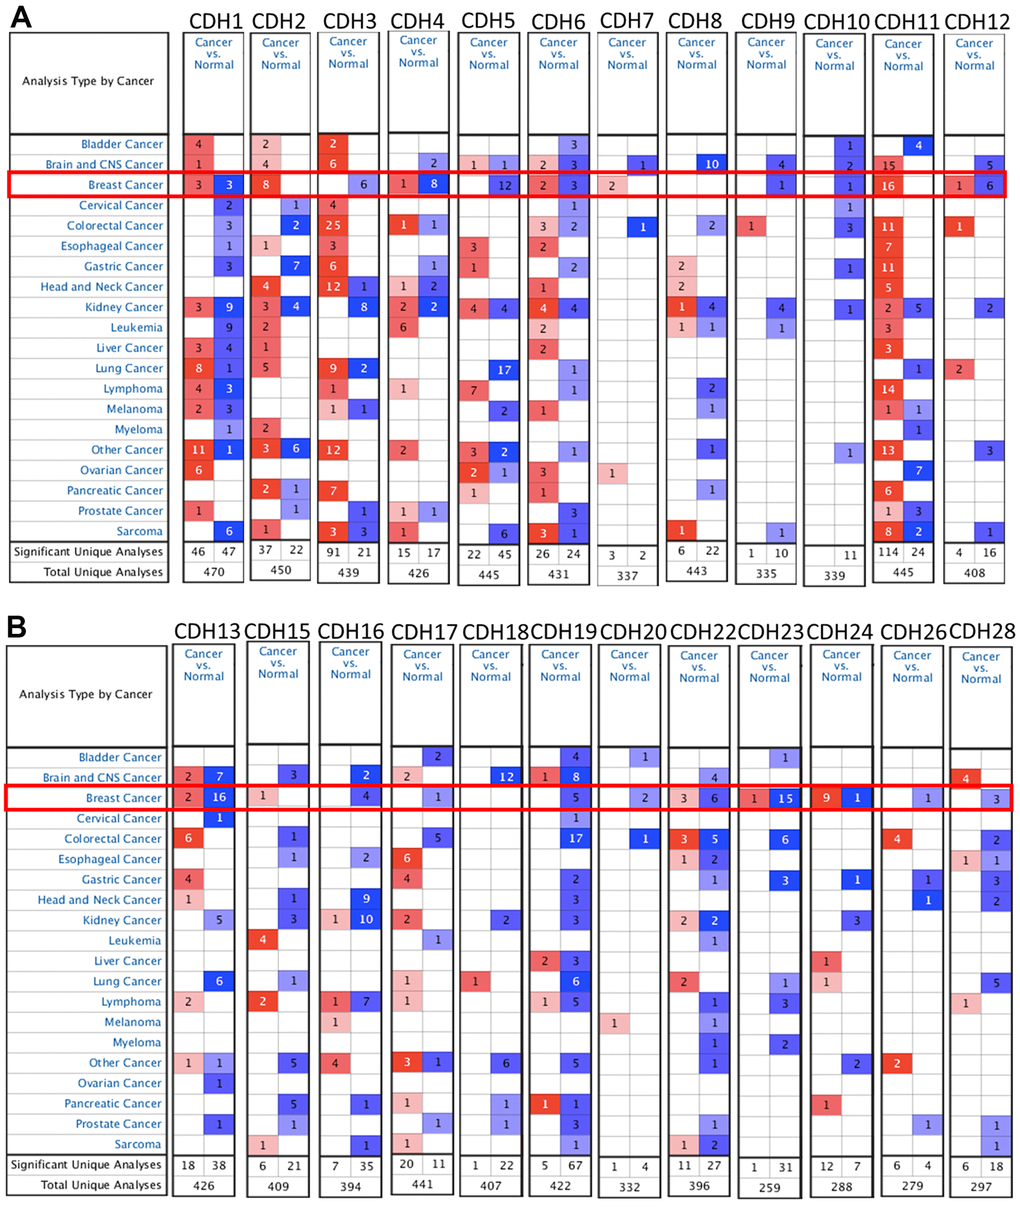 mRNA transcription levels of cadherin (CDH) gene family members (ONCOMINE). A red background with numbers indicates studies including expression levels of CDH family members corresponding to our selection standards (with p values 1.5, and the expressed gene rank in the top 10% as selection thresholds) in cancer tissues; blue (the same selection threshold) in normal tissues. The number for the significant unique analyses means that the queried genes significantly differed in these studies. The number for the total unique analyses means the total number of queried genes in these studies. (A) mRNA transcription levels of CDH1/2/4/6/7/11/12 were overexpressed in breast cancer samples compared to normal tissues, while transcriptional levels of CDH1/3/4/5/6/9/10/12 were downregulated compared to normal tissues. (B) mRNA transcription levels of CDH13/15/22/23/24 were overexpressed in breast cancer samples compared to normal tissues, while transcriptional levels of CDH13/16/17/19/20/22/23/24/26/28 were downregulated compared to normal tissues. Red indicates upregulation, and blue indicates downregulation compared to normal tissues.